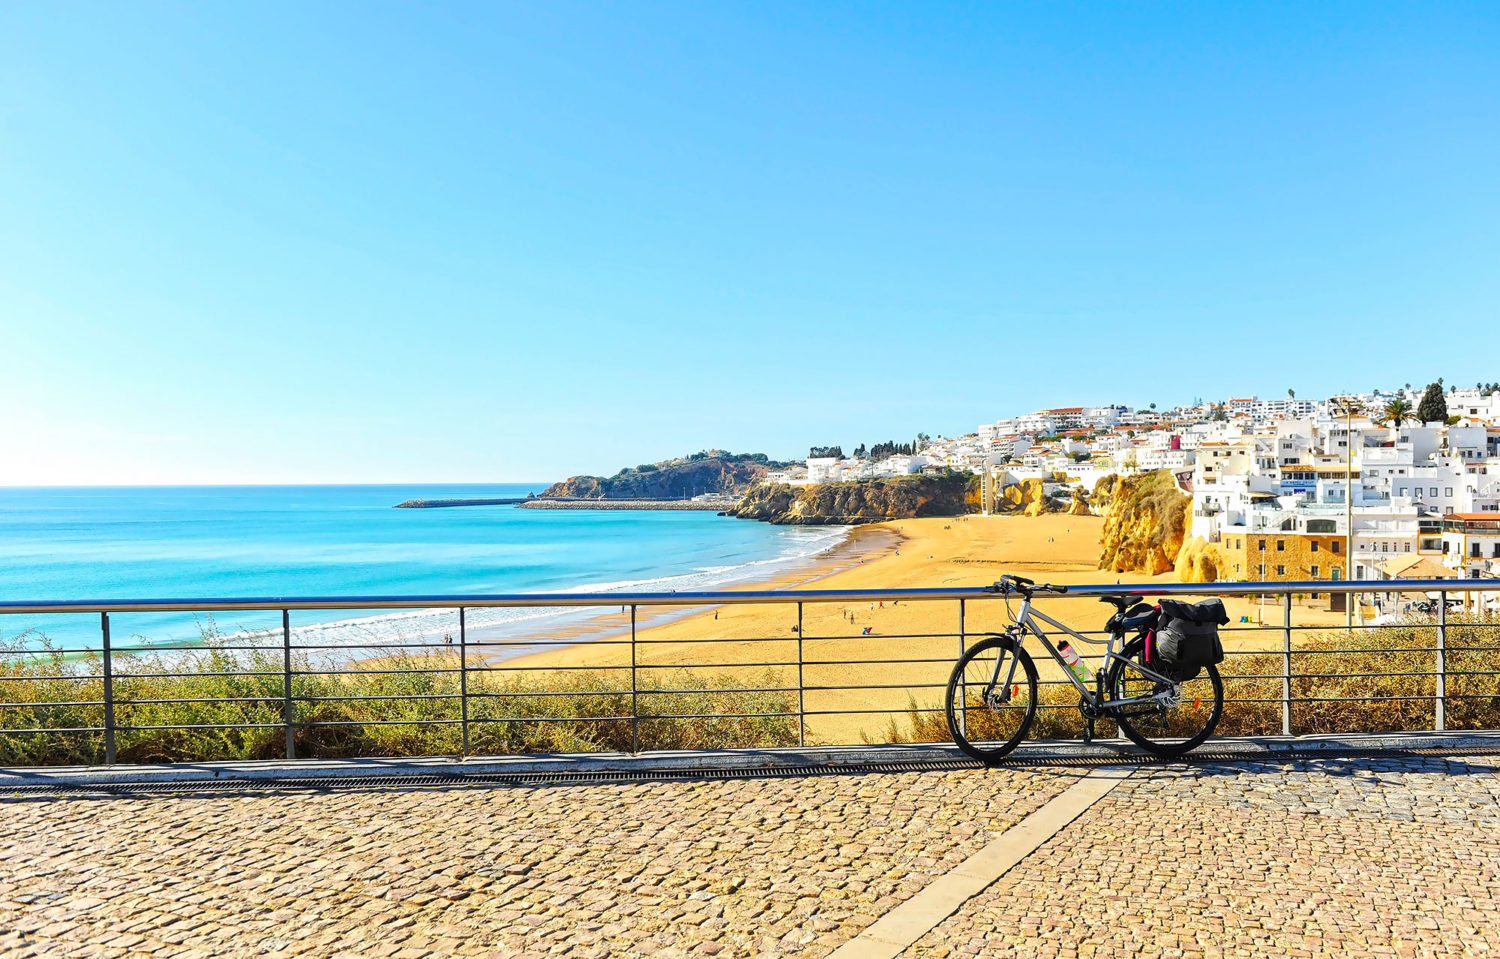 Bicycle near a sandy beach and a seaside town in Portugal